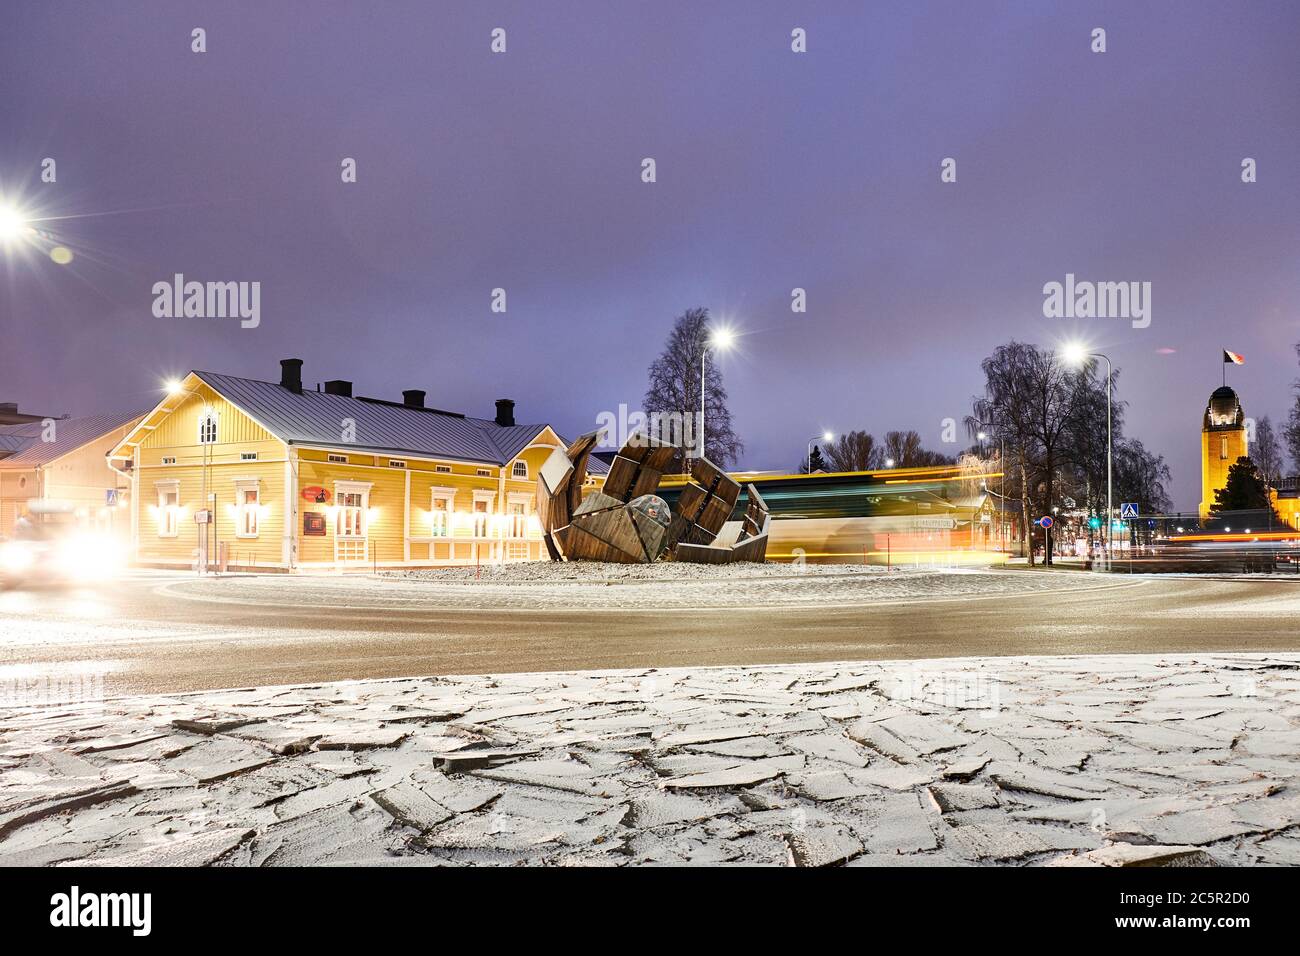 Joensuu, Finland - November 23, 2018: The new roundabout at night with light trails. In the center of the intersection is a modern art object. Old Eur Stock Photo